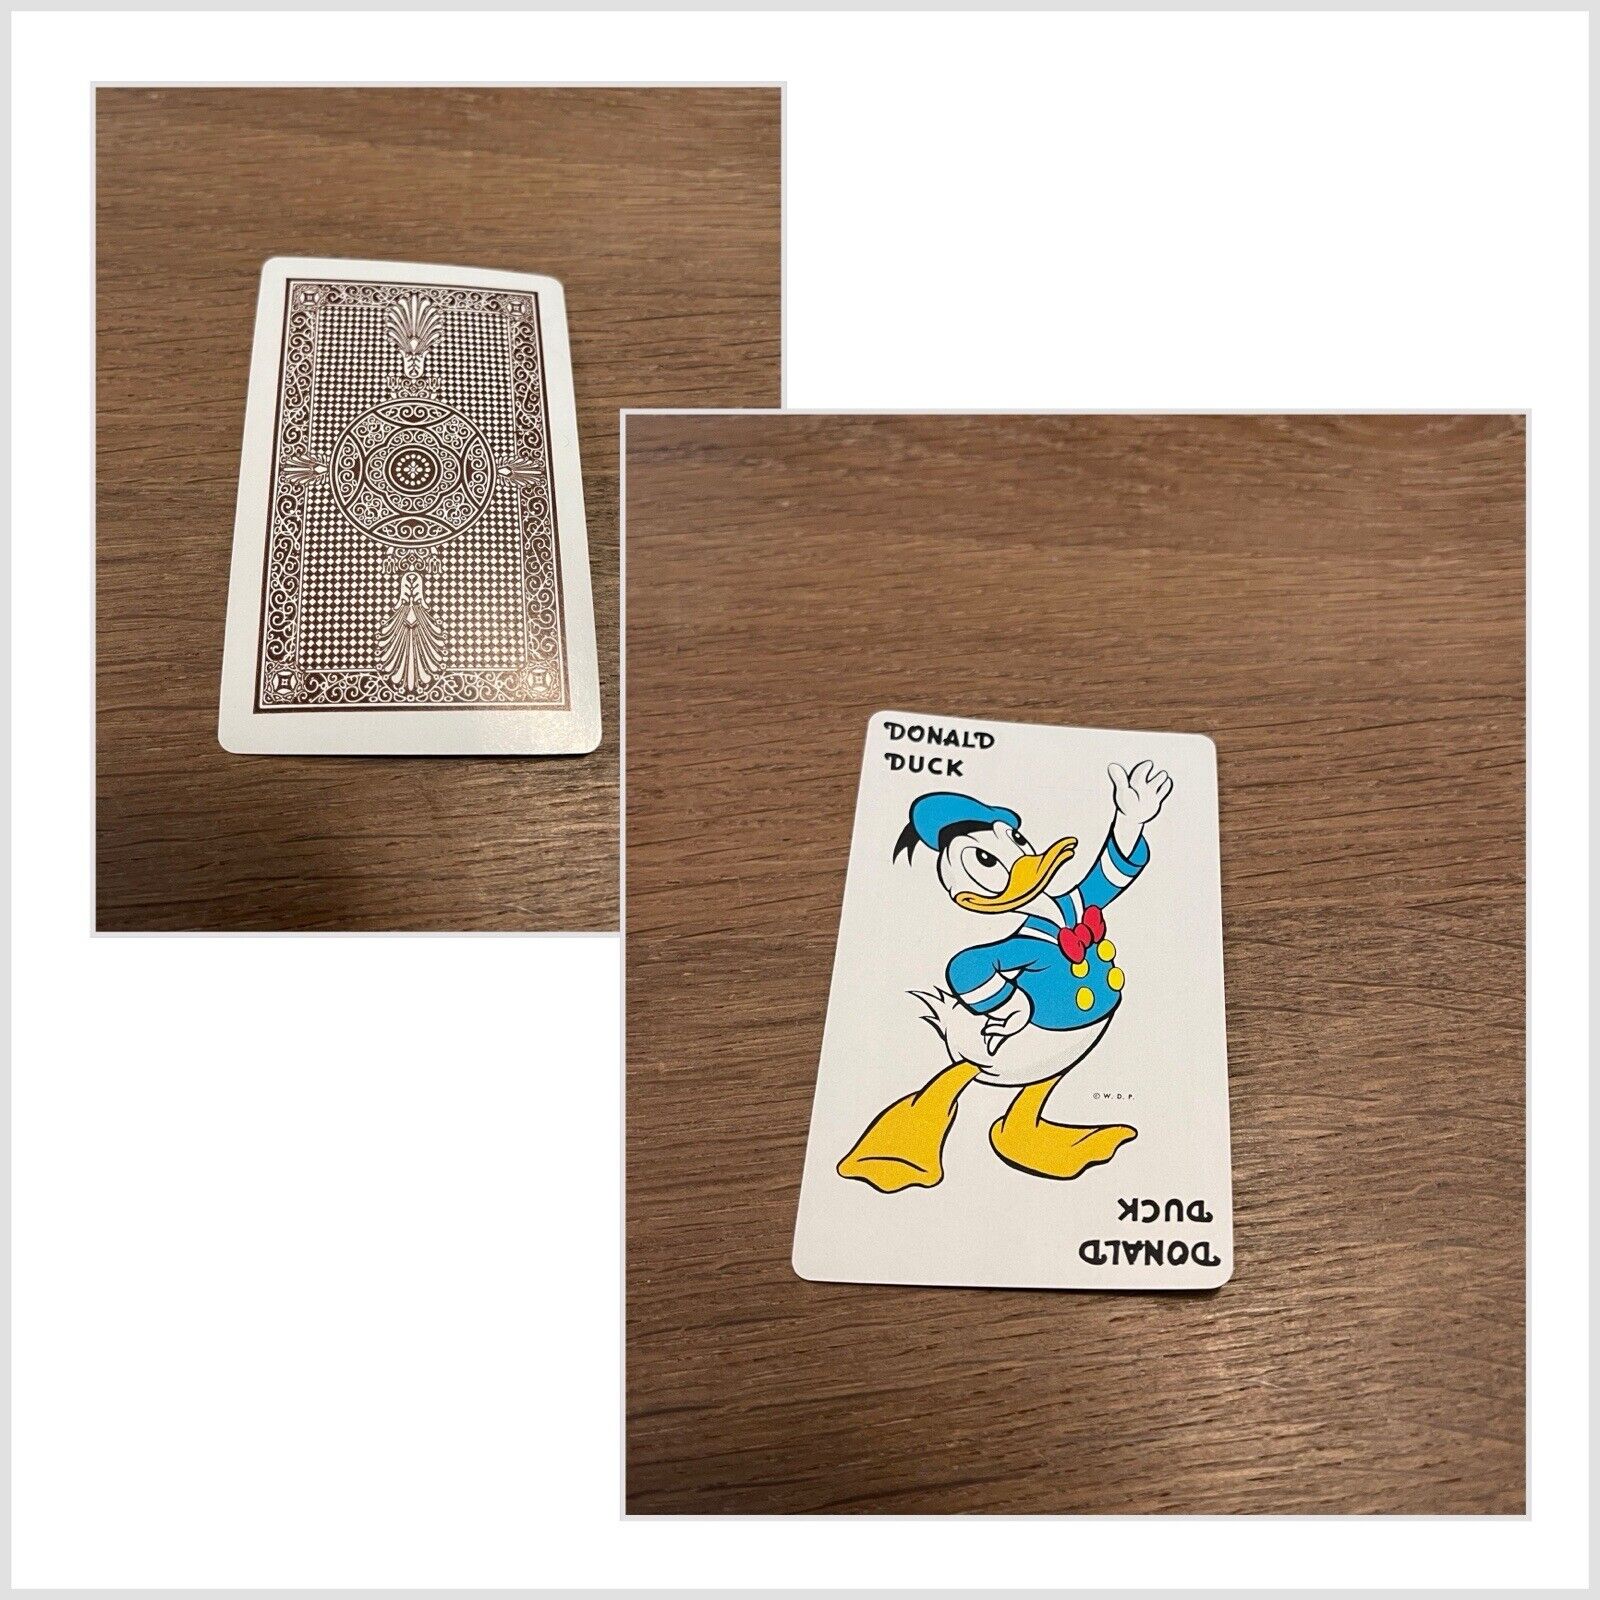 RARE VINTAGE 1949 WHITMAN DISNEY DONALD DUCK PLAYING CARD GAME DONALD DUCK CARD